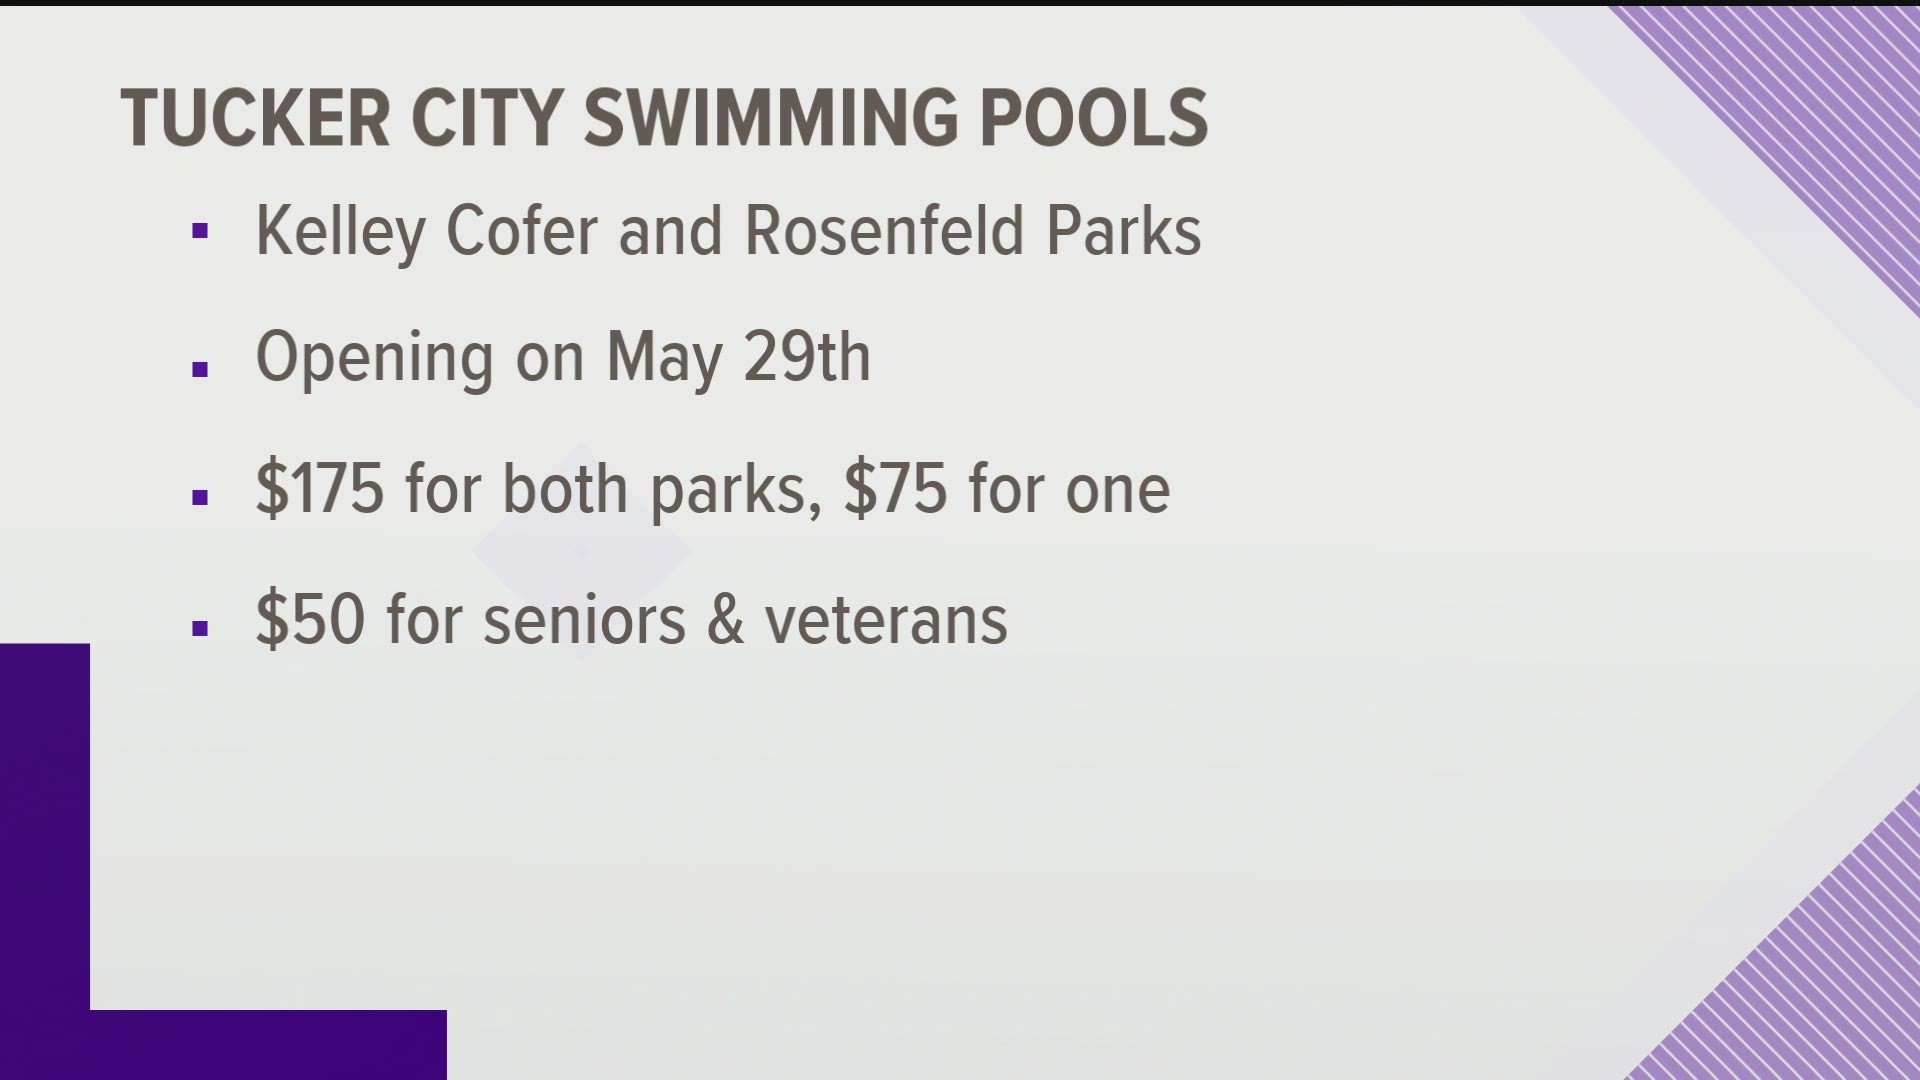 The City of Tucker announced they will open both city pools for the summer season.